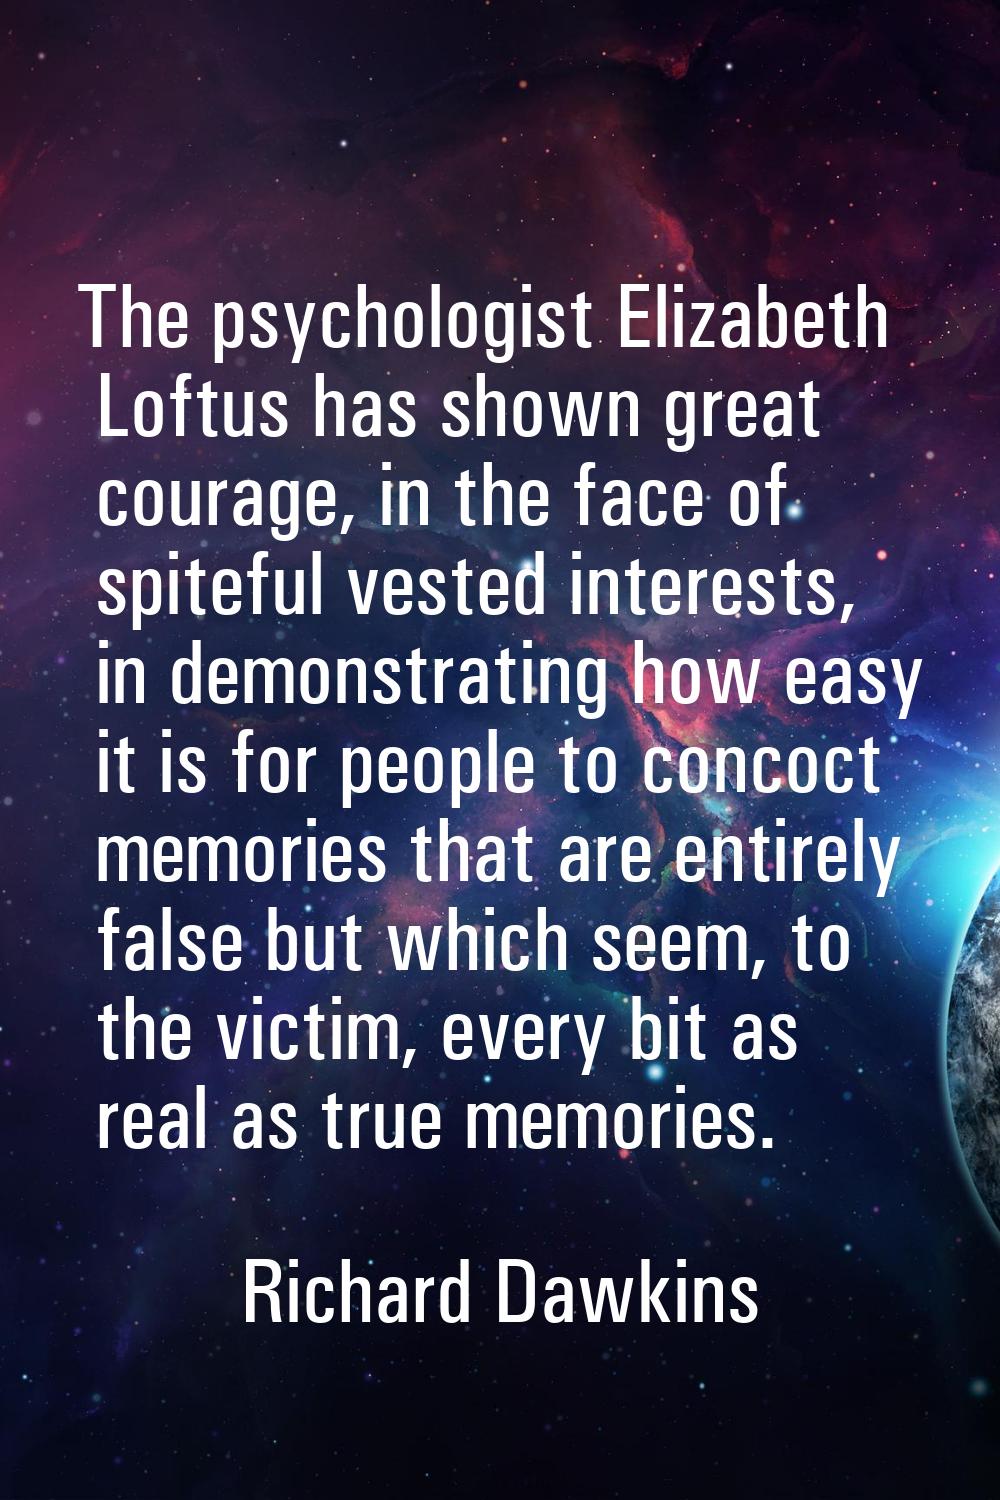 The psychologist Elizabeth Loftus has shown great courage, in the face of spiteful vested interests